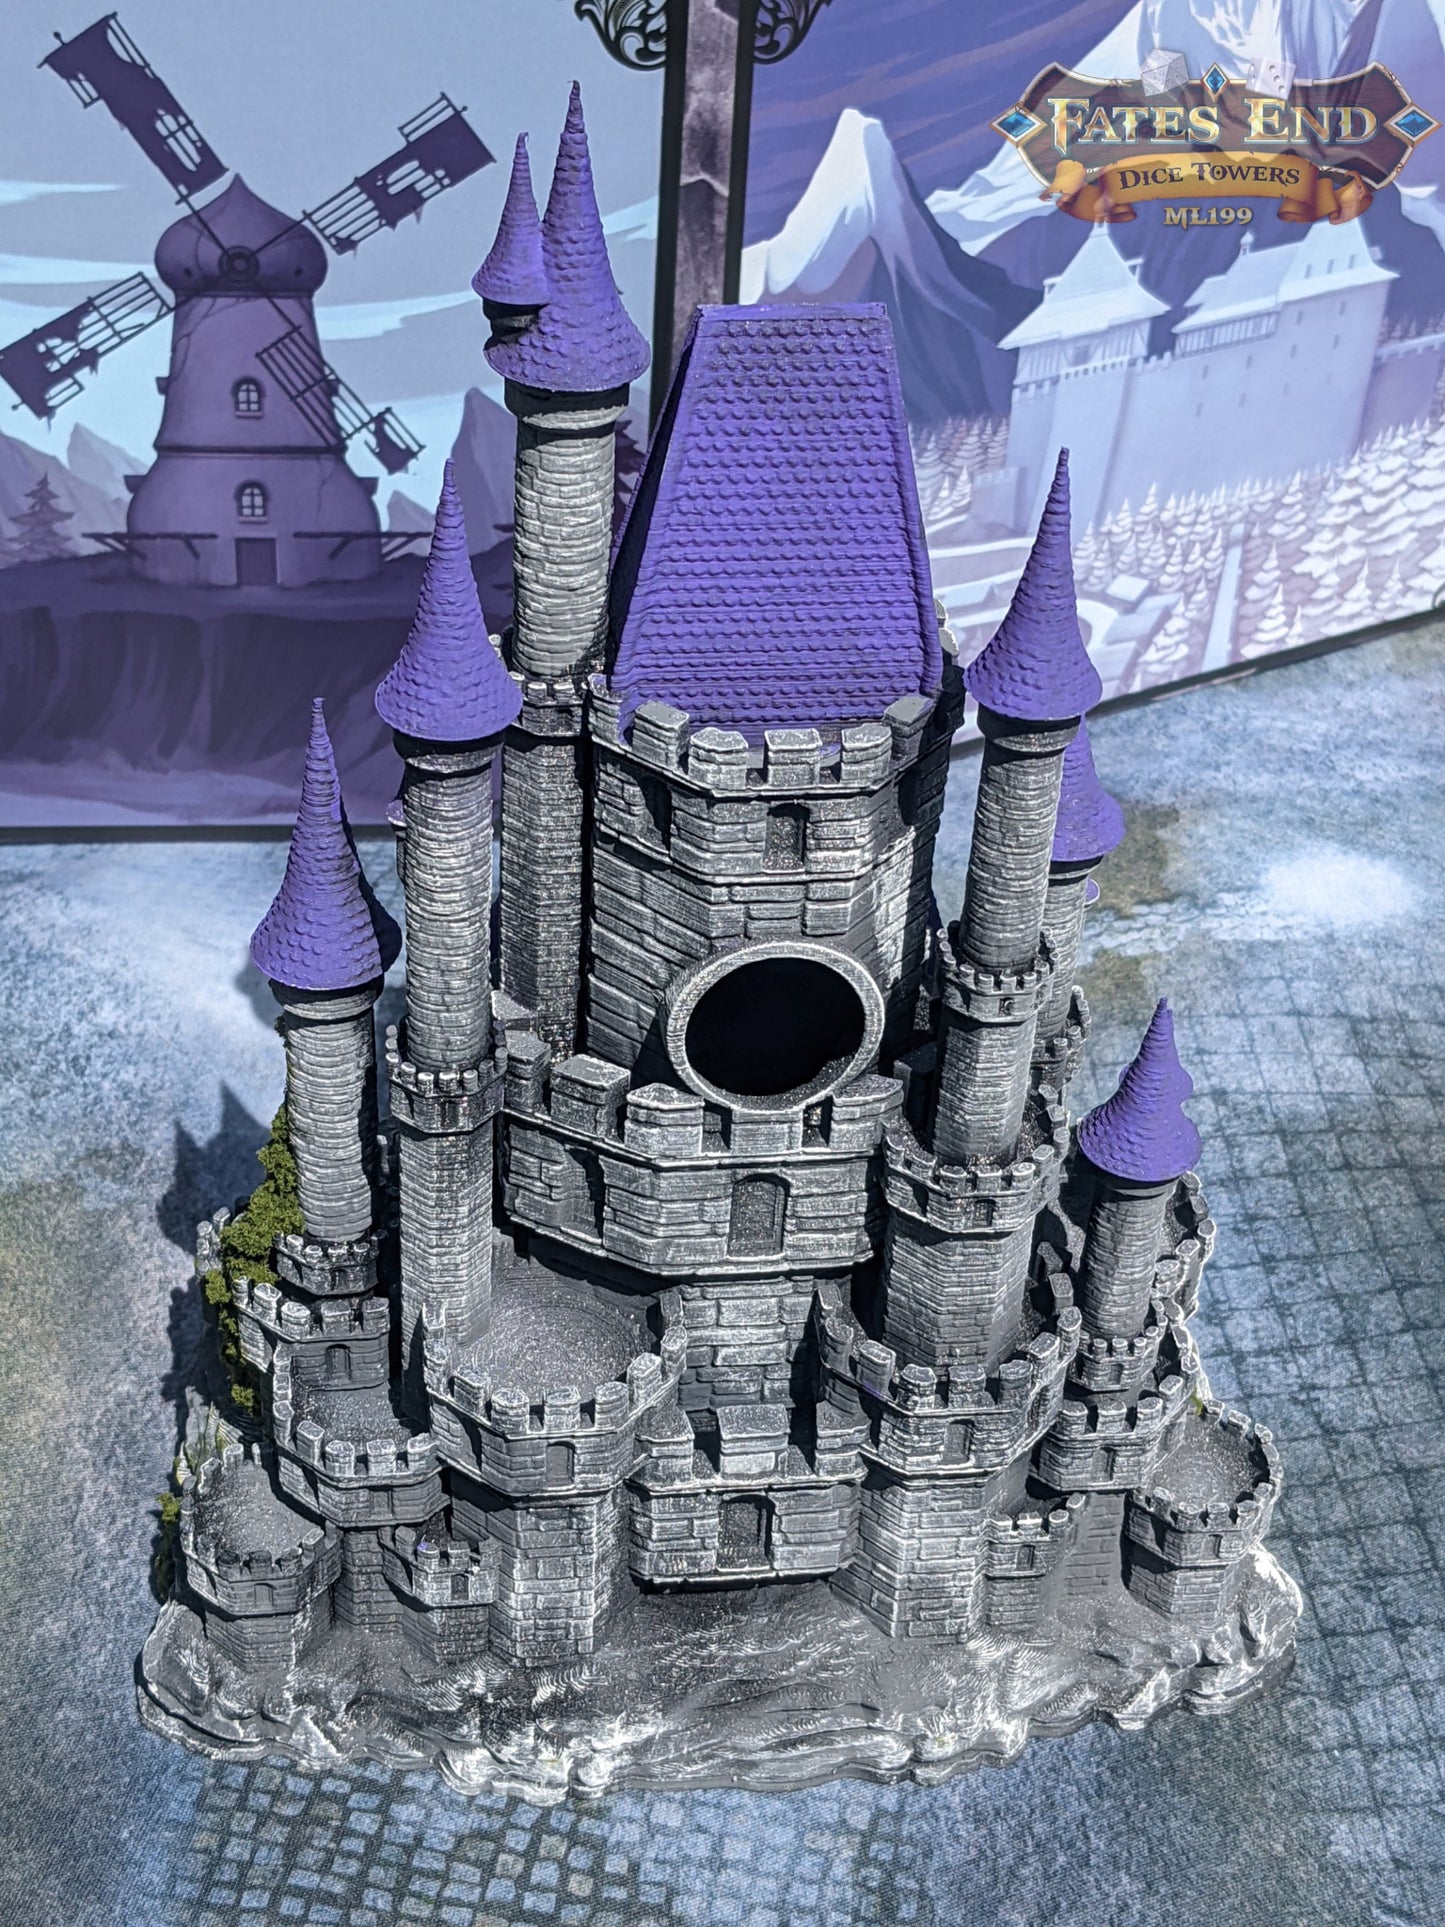 Mimic Castle 3D Printed Dice Tower-Fate's End Collection-Tabletop RPG Gaming Fantasy Cosplay - Dungeons and Dragon DnD D&D Wargaming.